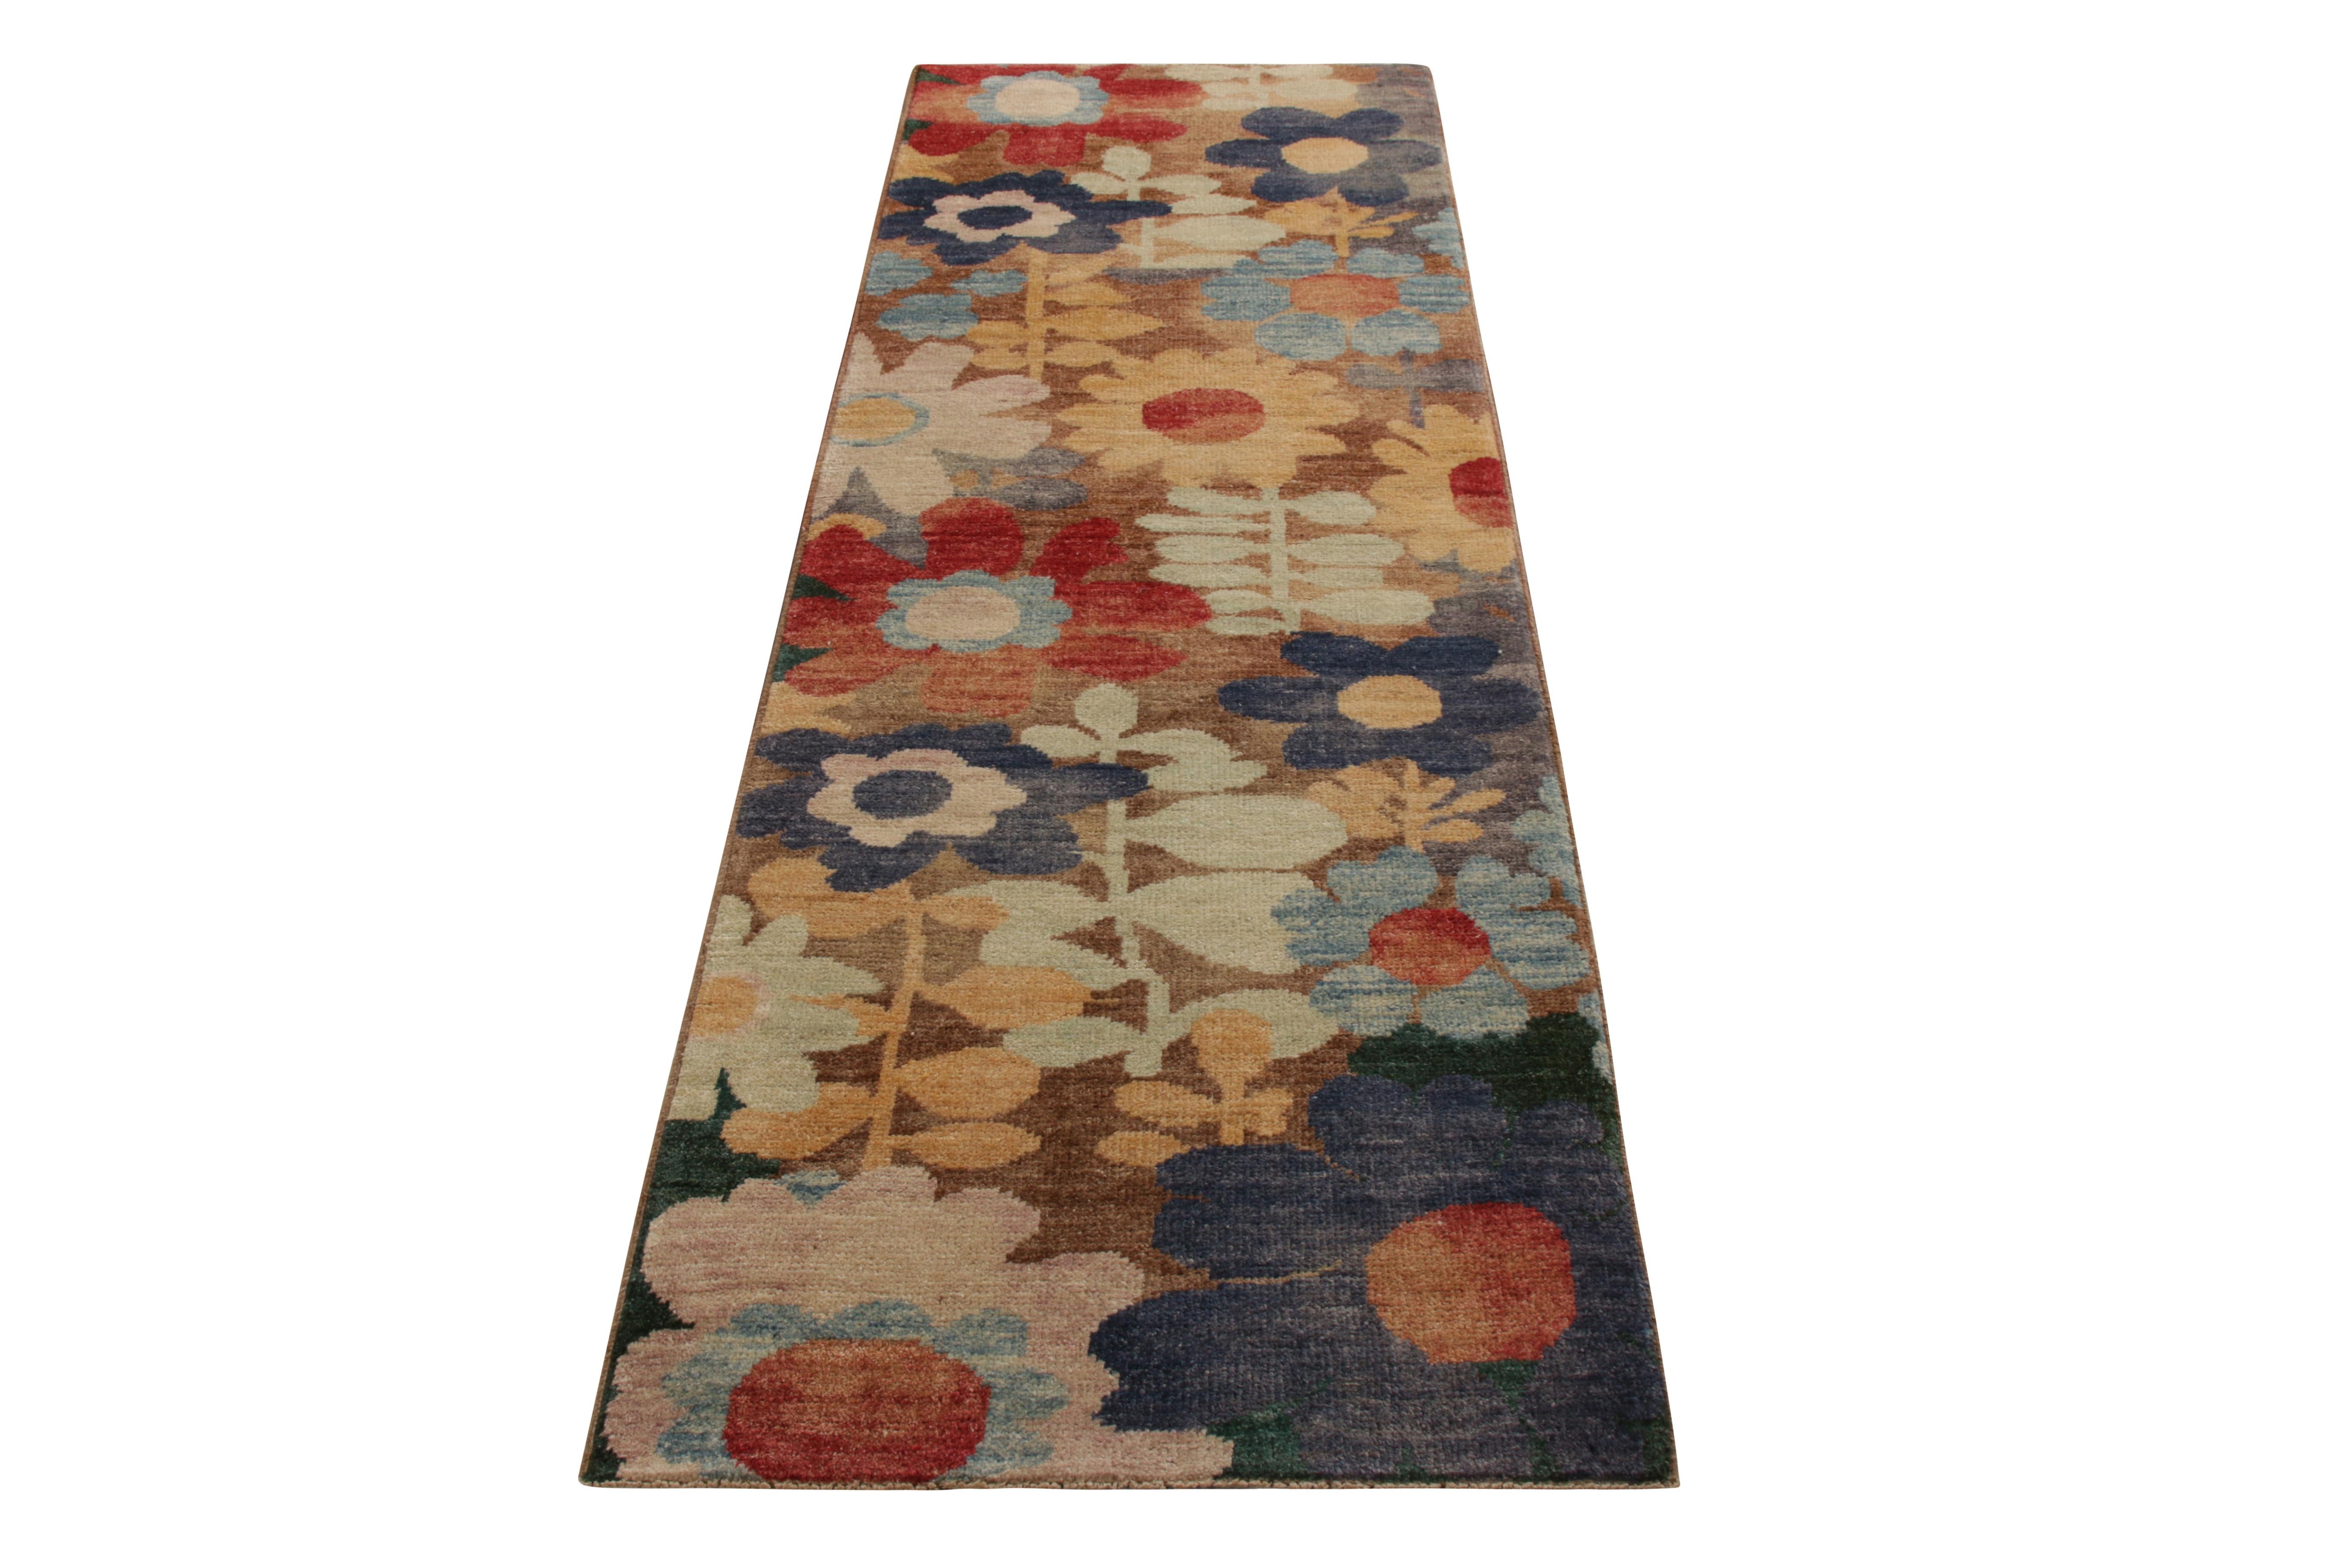 A contemporary 3 x 8 runner from Rug & Kilim’s New & Modern Collection, hand knotted in wool. Enjoying a forgiving, playful pallet of multicolor blues, reds, yellows, and other hues throughout inviting all over floral patterns. Exemplary in its